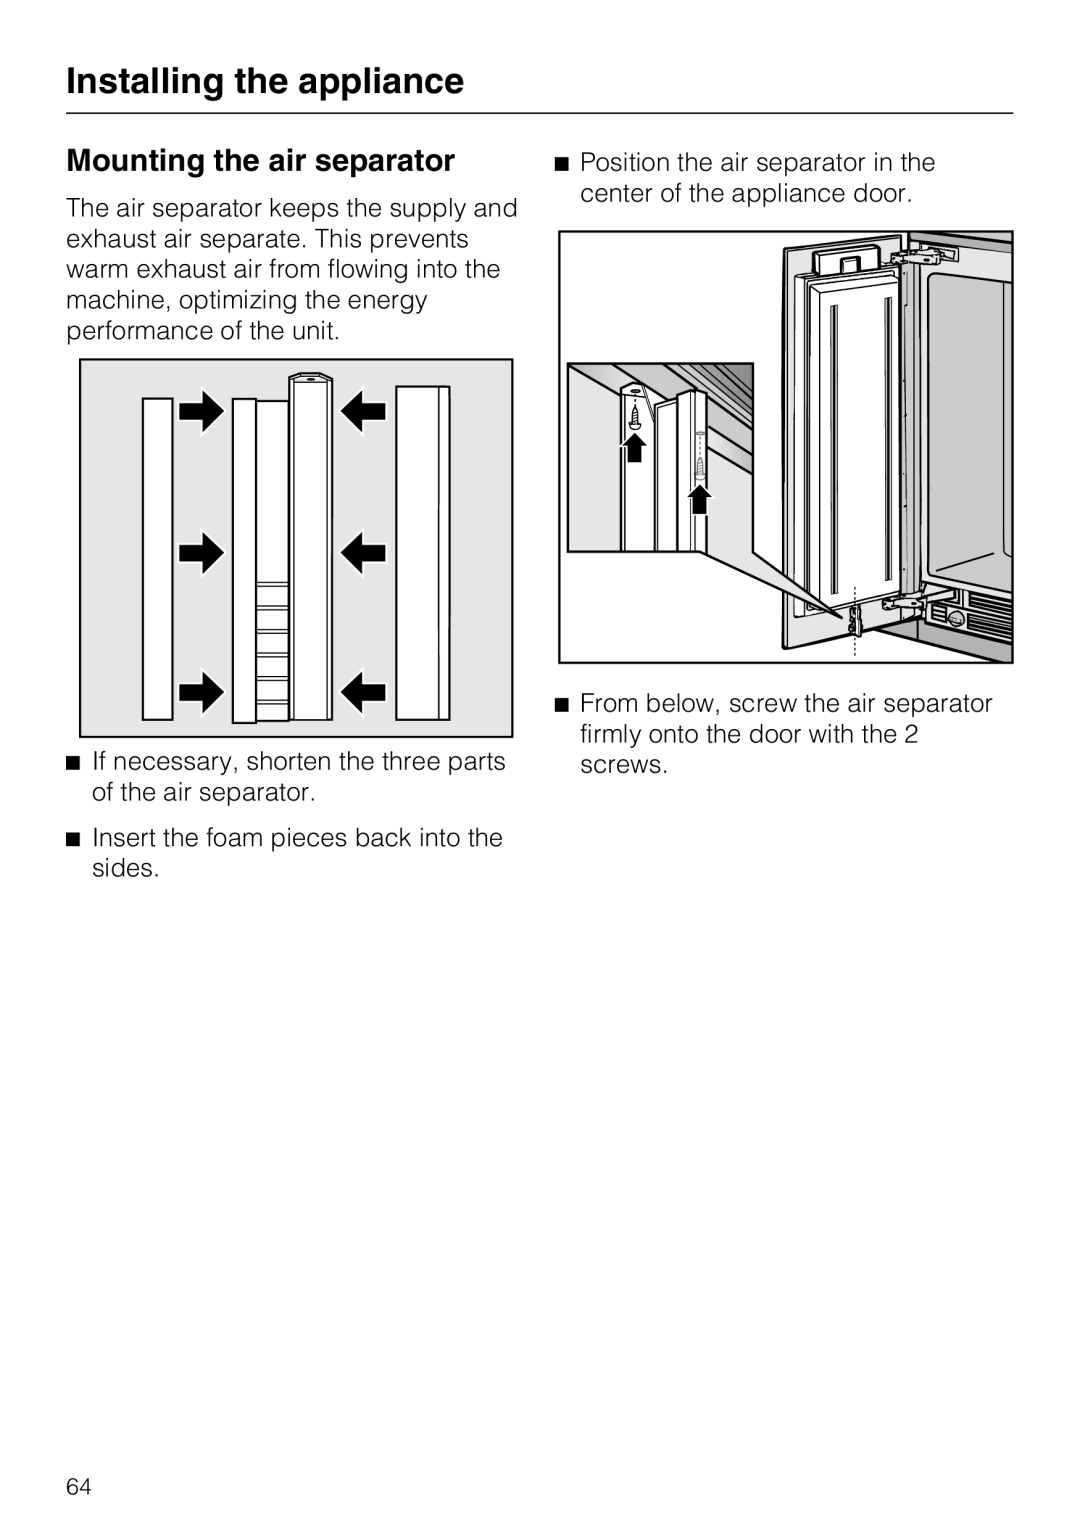 Miele F 1411 SF installation instructions Mounting the air separator, Installing the appliance 